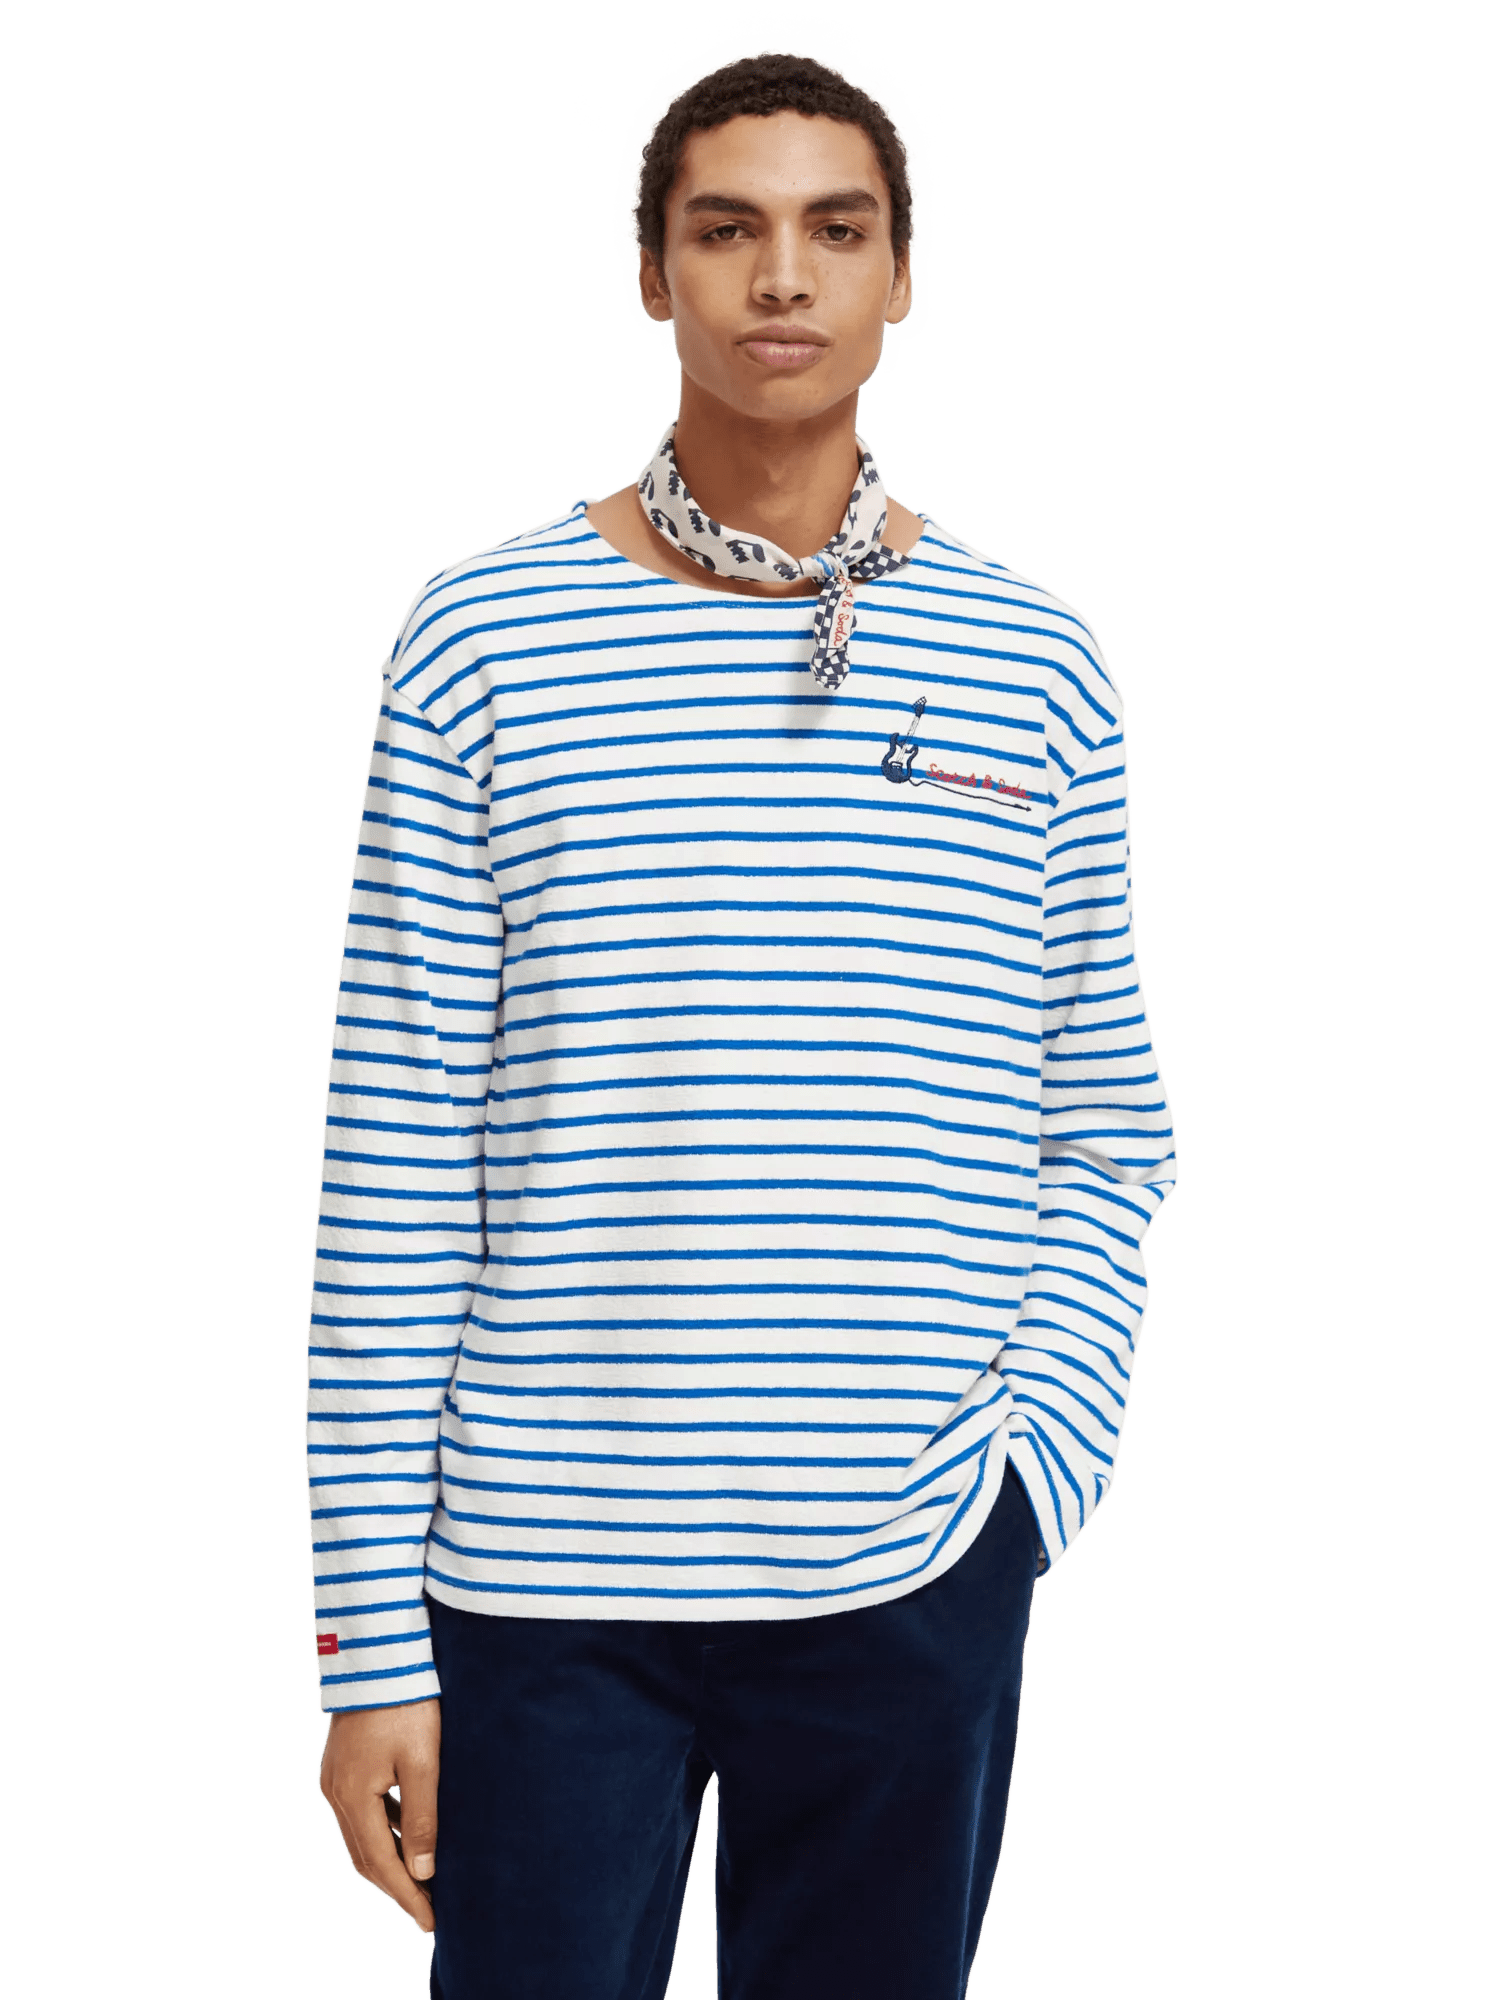 Scotch & Soda Relaxed fit striped long-sleeved T-shirt MDL-CRP